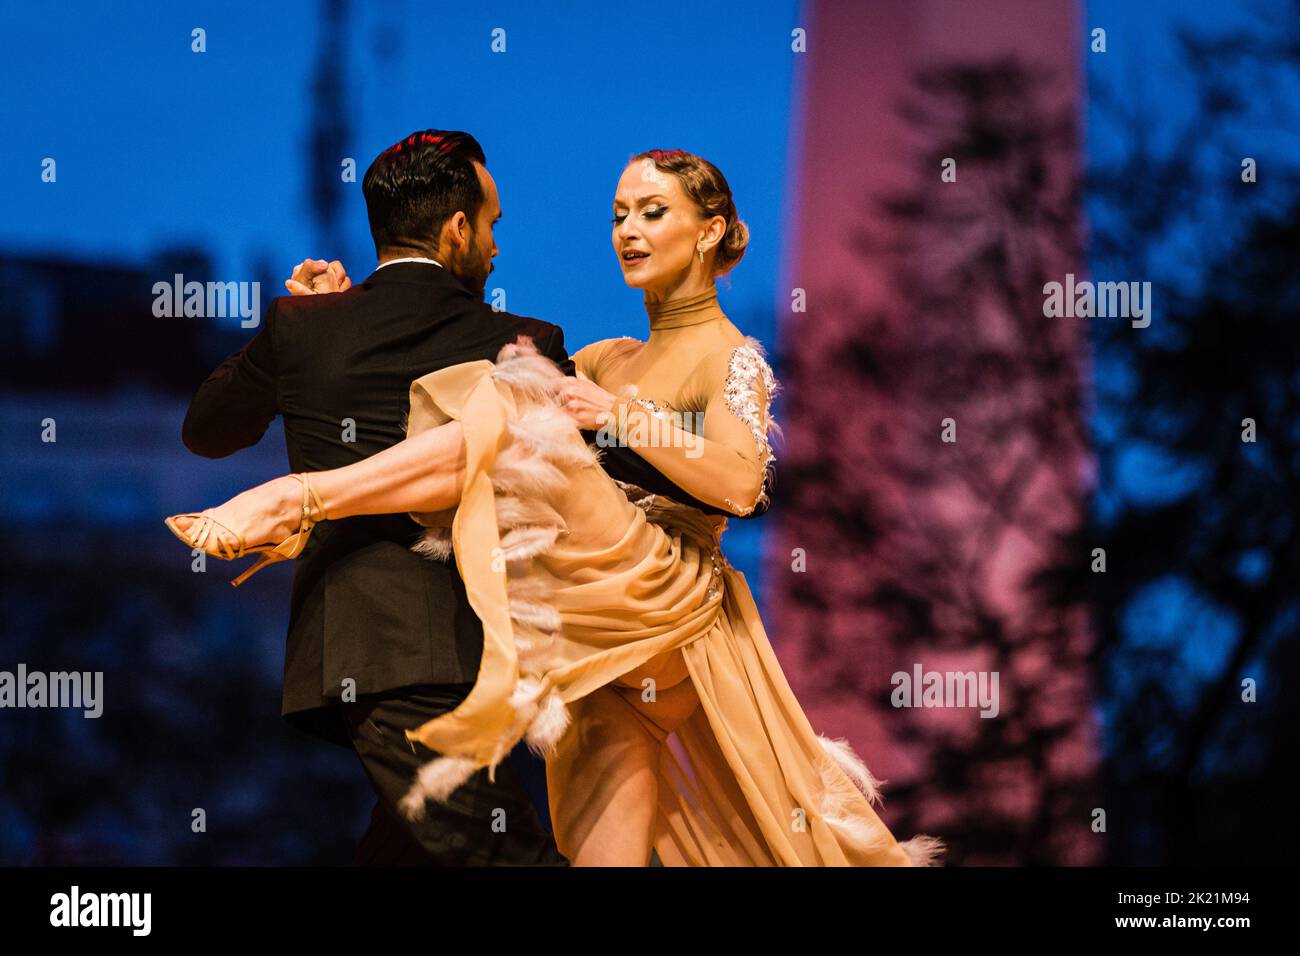 Buenos Aires, Argentina. 17th Sep, 2022. One of the finalist couples on the Stage Tango category performs with the Obelisk of the city of Buenos Aires in the background. The 2022 edition of the World Tango Championship was held at the foot of the Obelisk of the City of Buenos Aires. With the assistance of thousands of people who arrived early to enjoy the virtuosity of the couples and the shows of the tango orchestras, the championship had the participation of 560 couples from 30 different countries. Credit: SOPA Images Limited/Alamy Live News Stock Photo